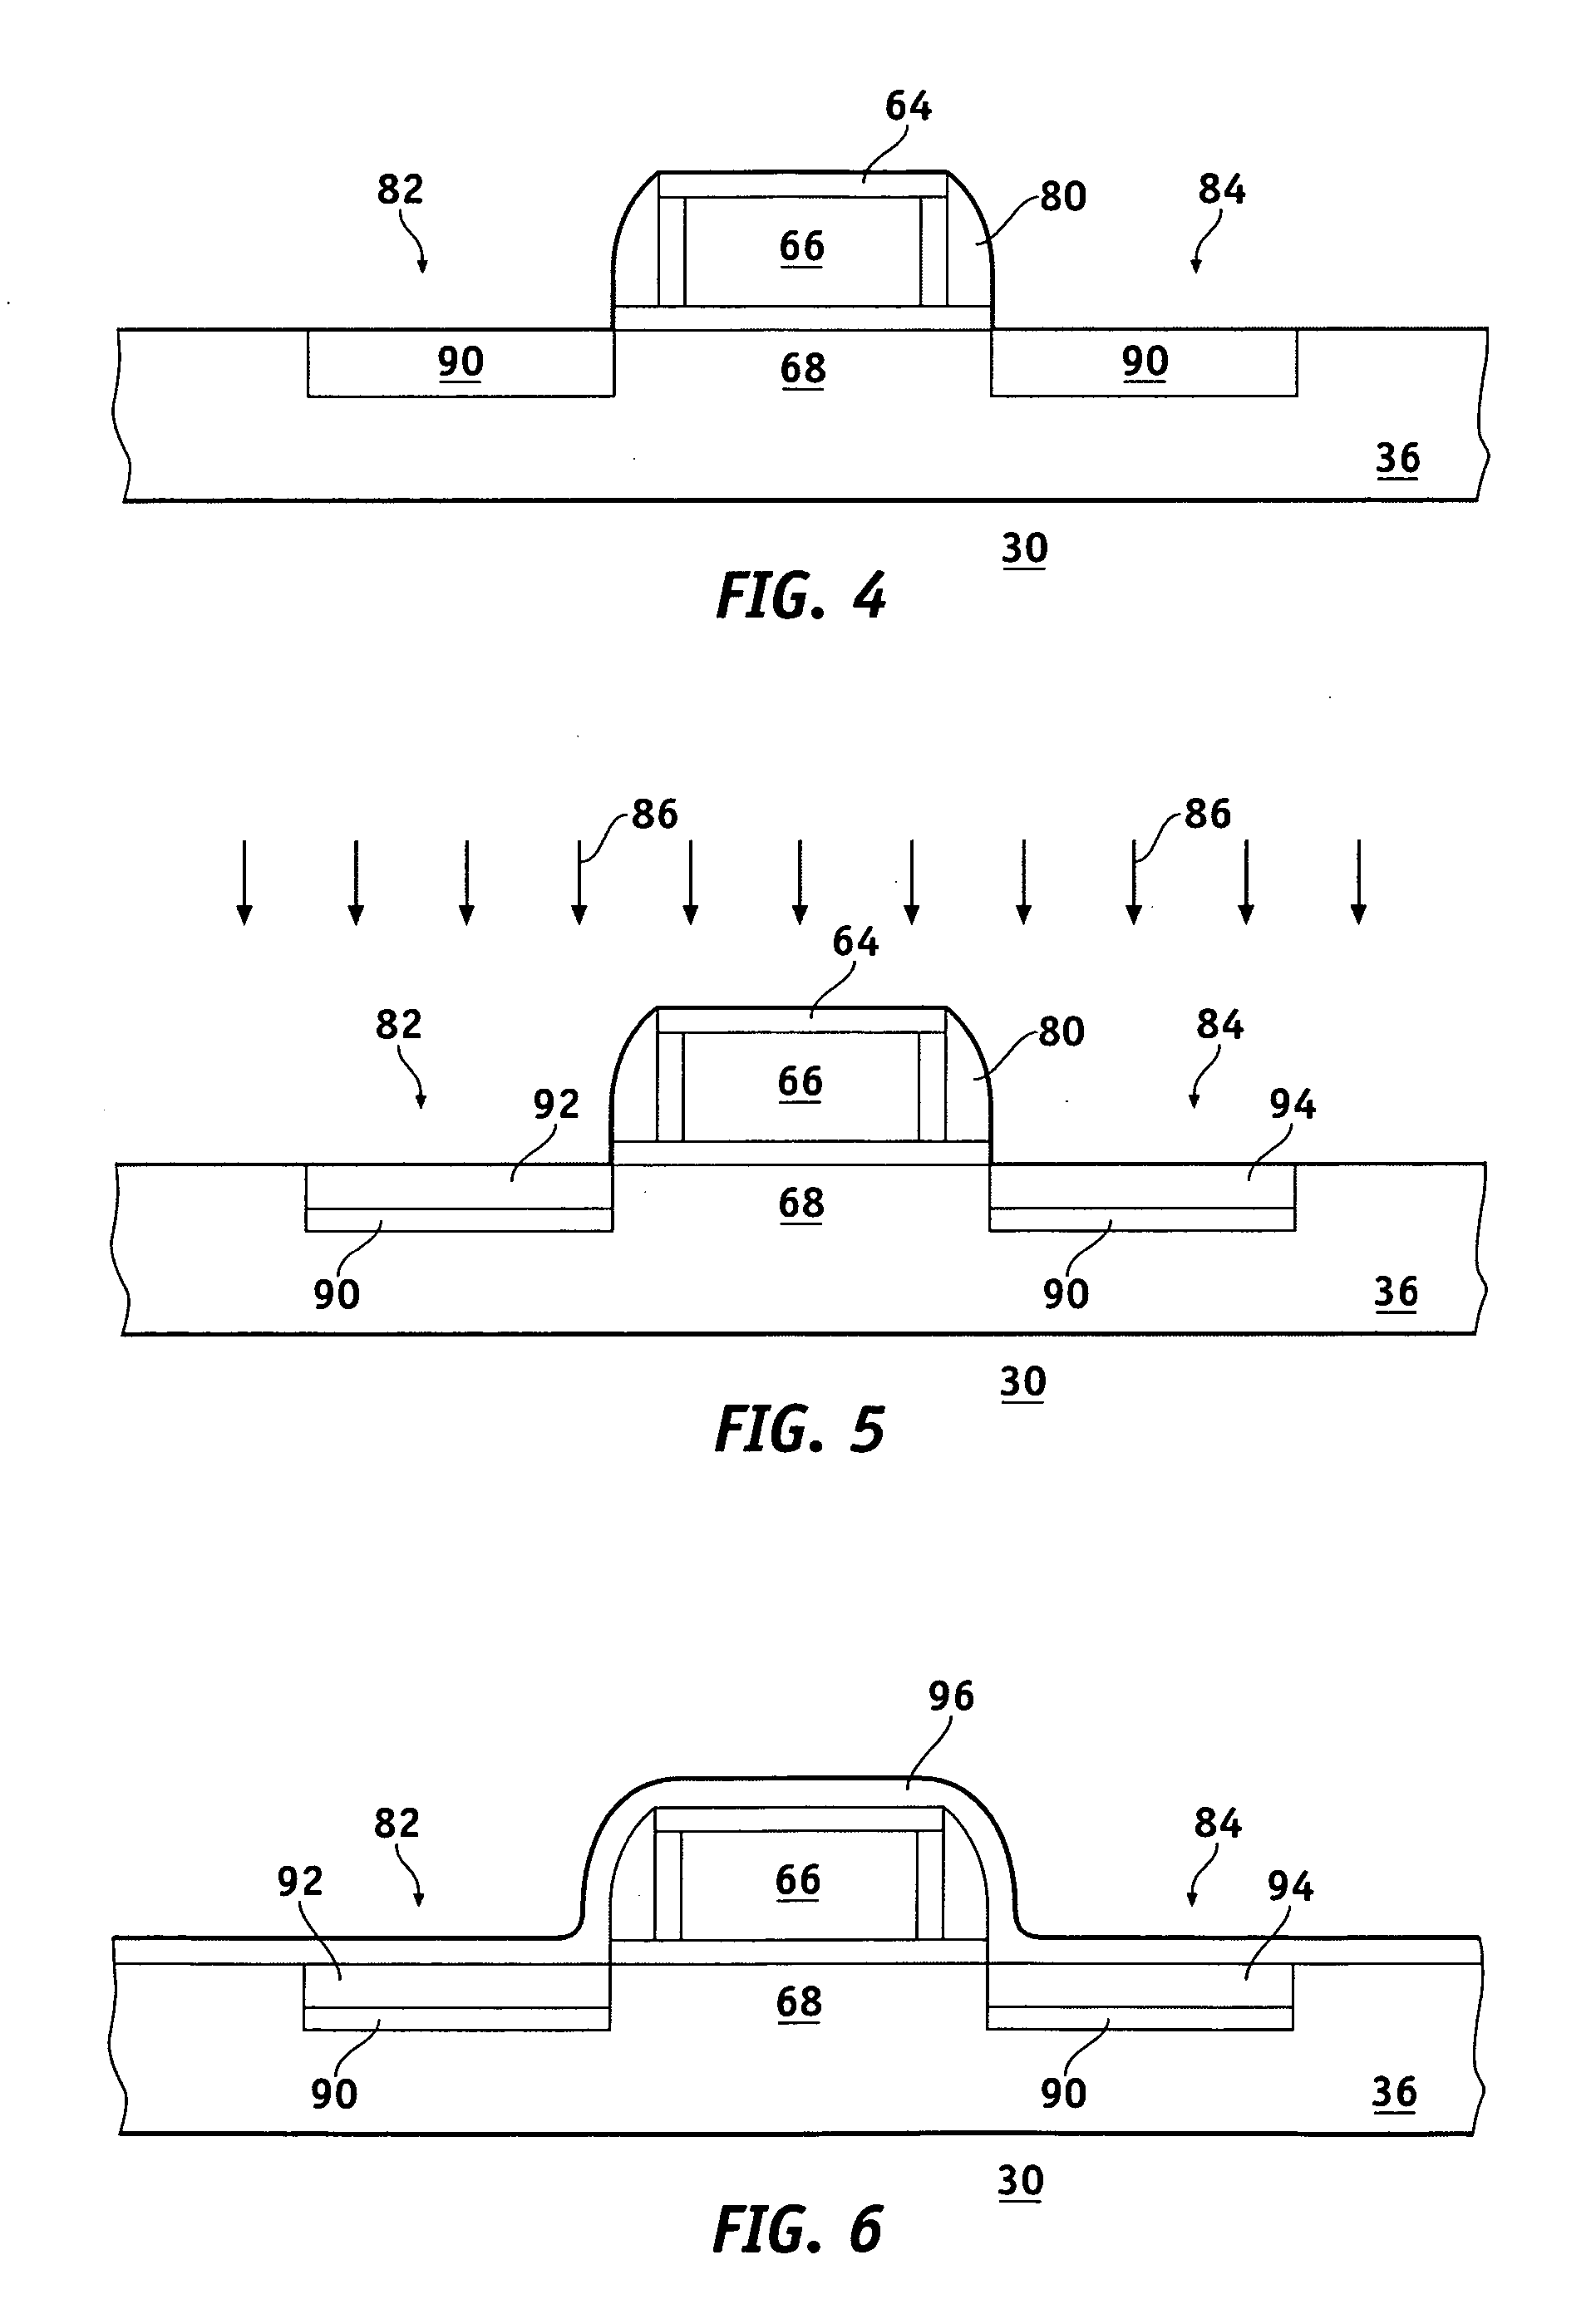 Methods for fabricating a stressed MOS device